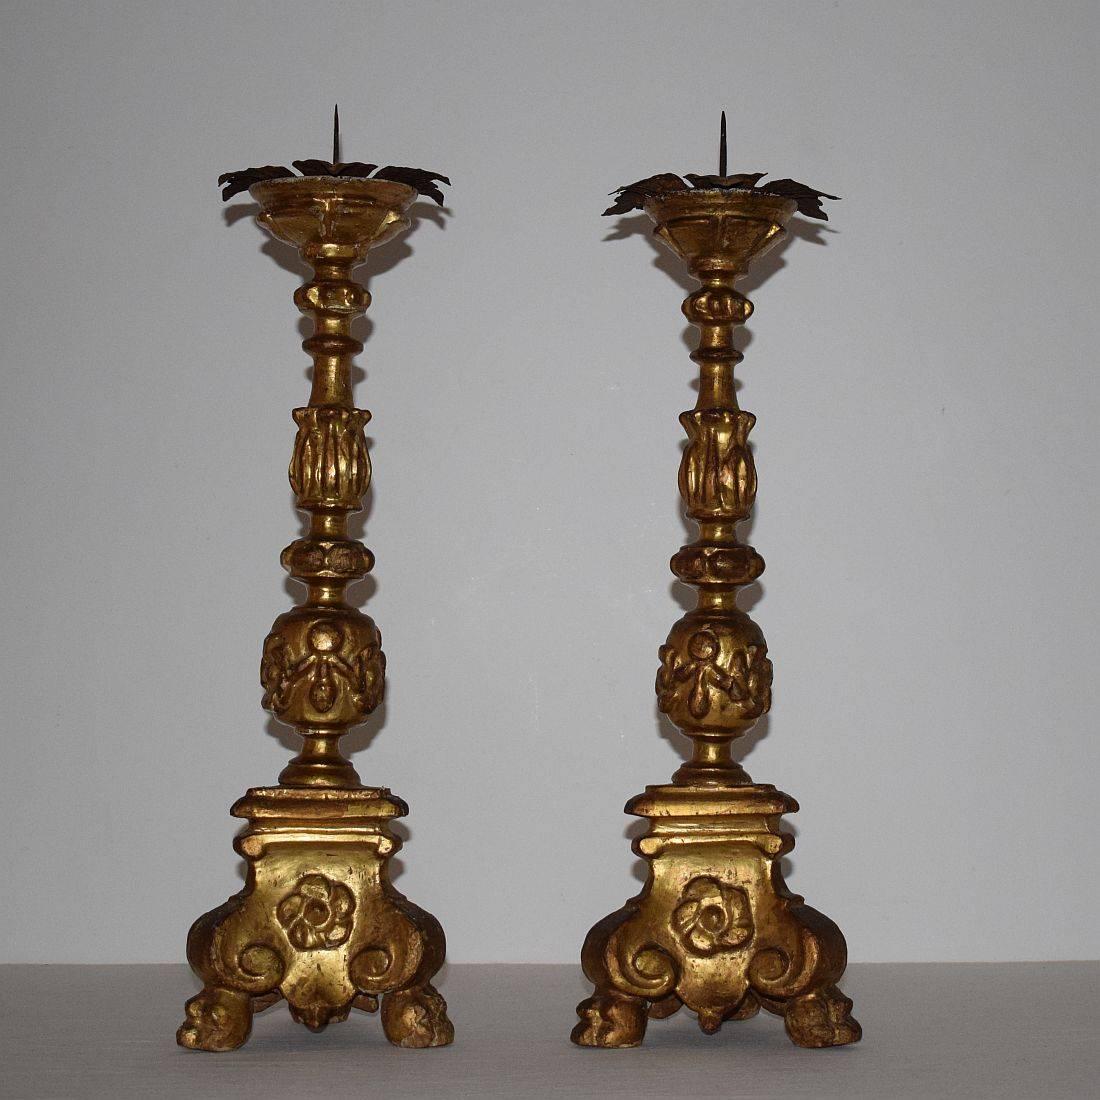 Carved 17th Century Italian Giltwood Candlesticks With Angels